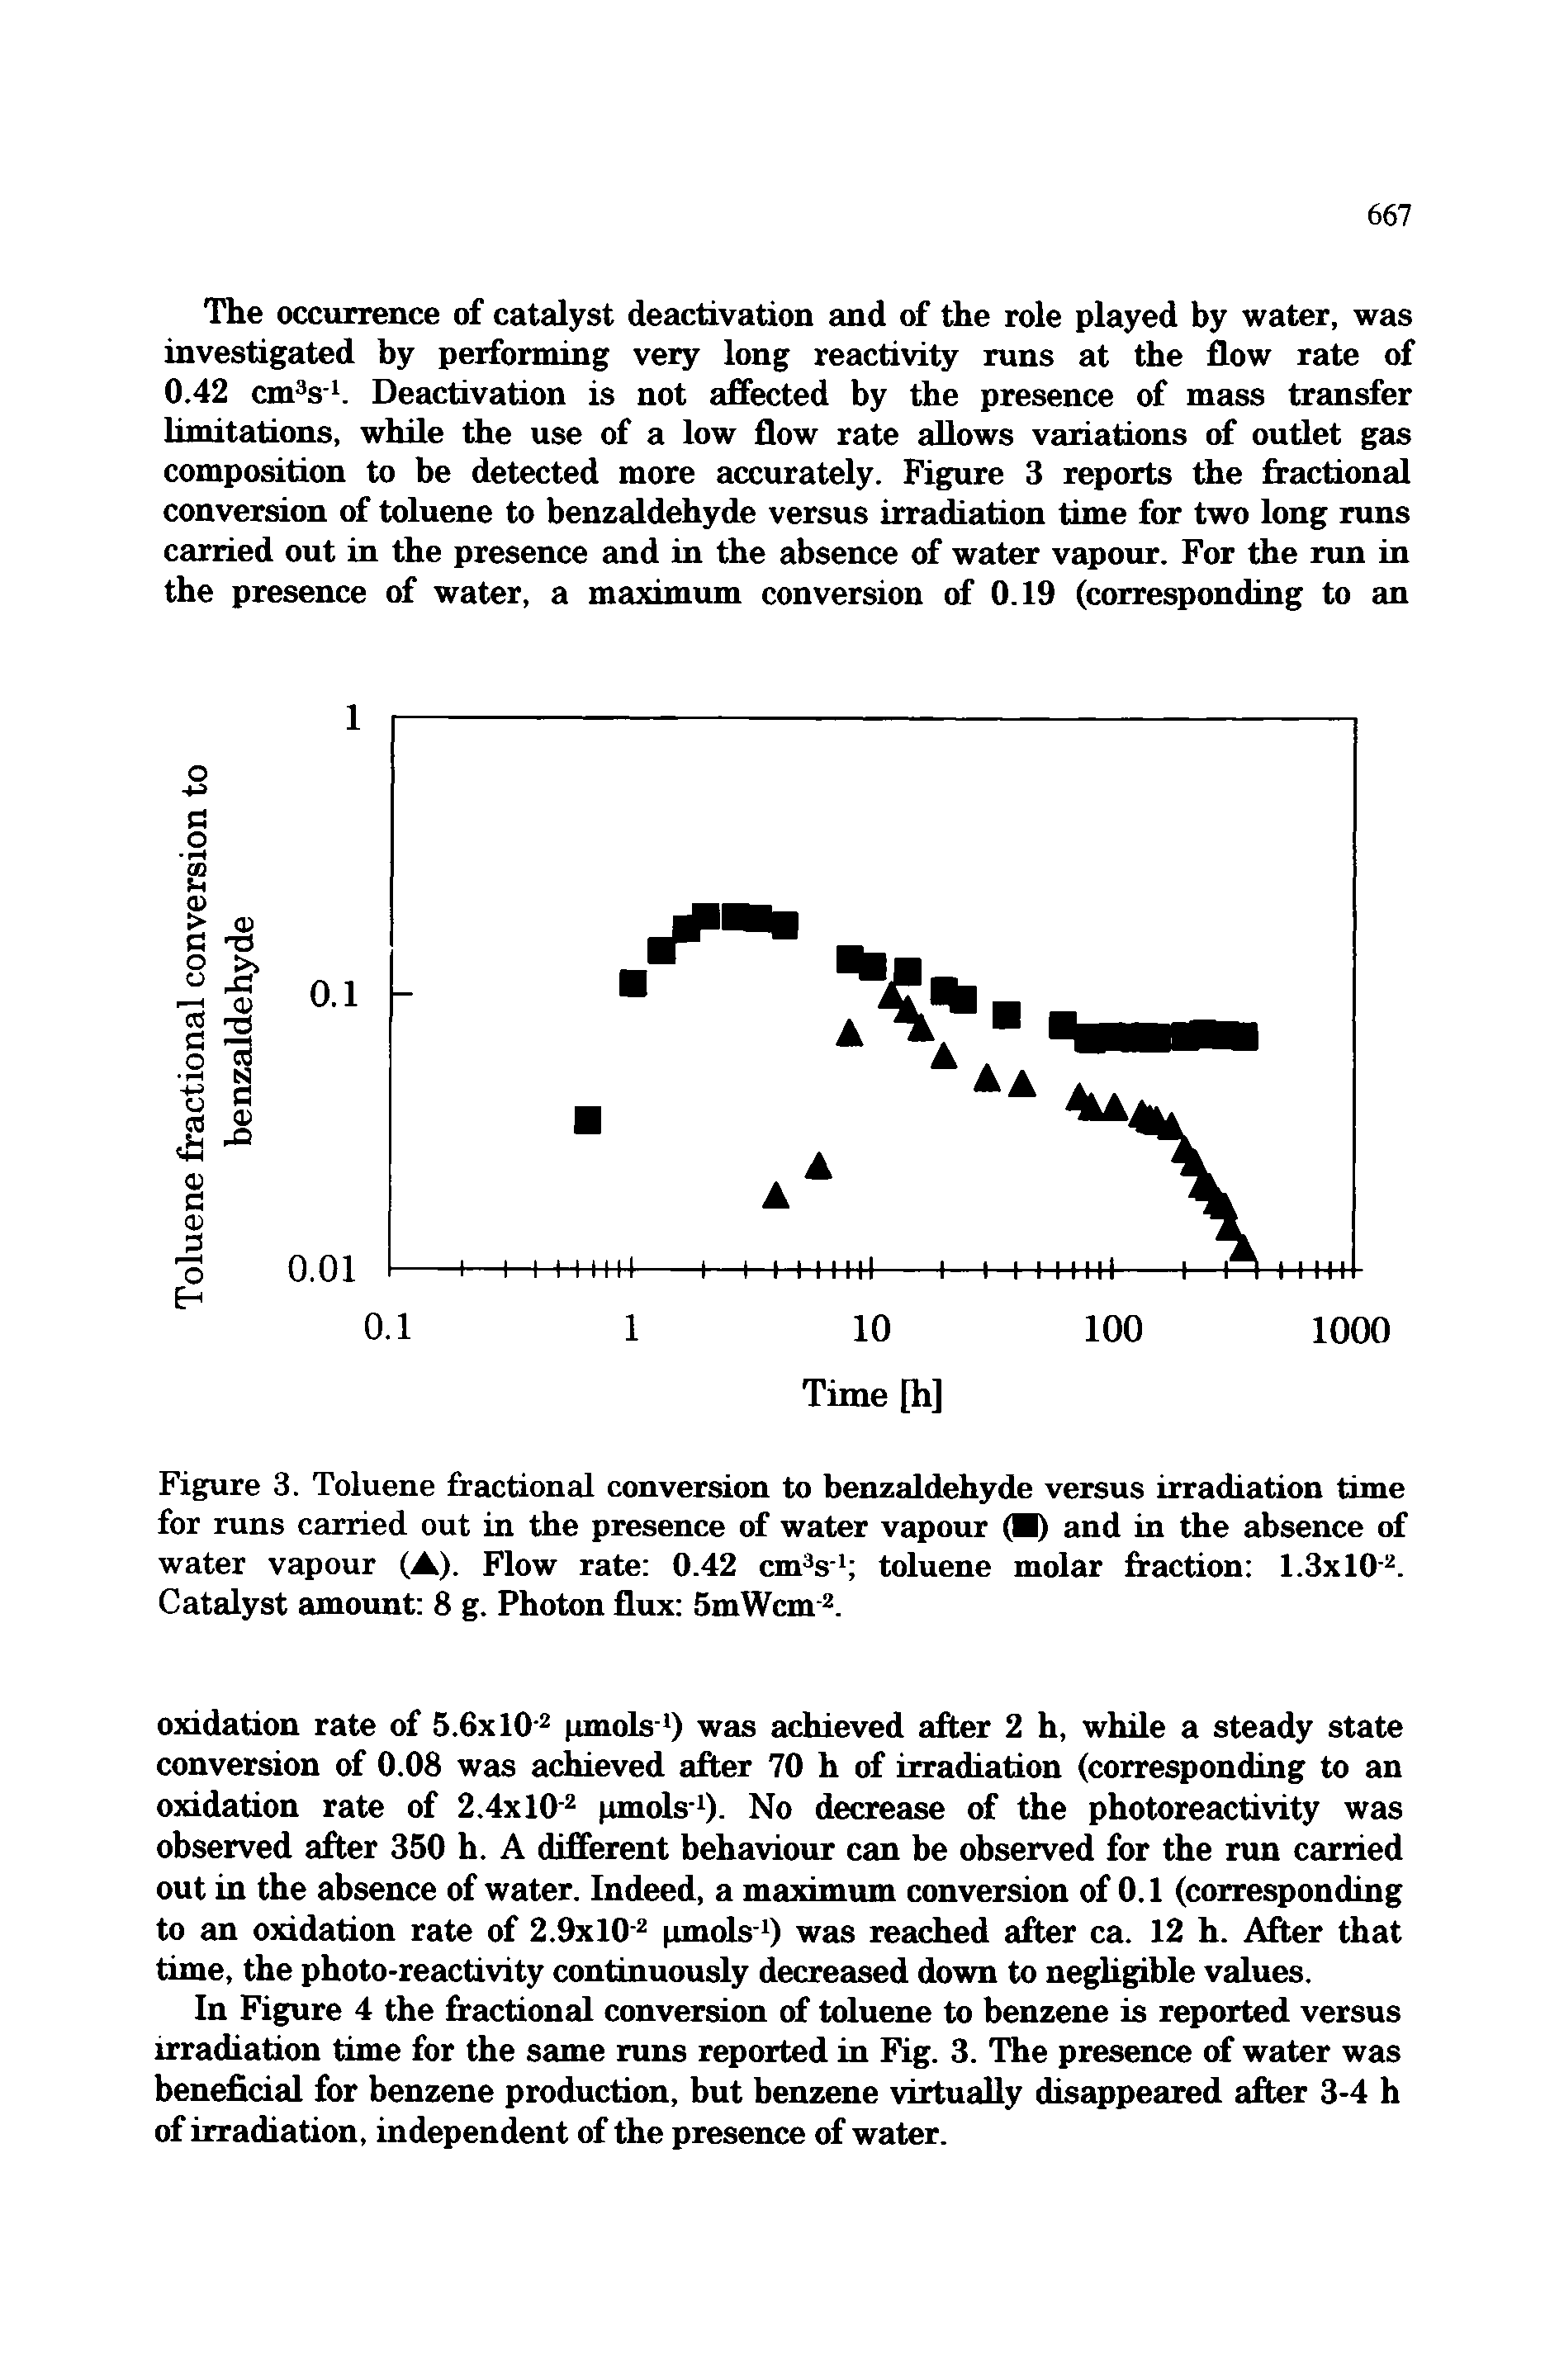 Figure 3. Toluene fractional conversion to benzaldehyde versus irradiation time for runs carried out in the presence of water vapour ( ) and in the absence of water vapour (A). Flow rate 0.42 cm s toluene molar fraction 1.3x10. Catalyst amount 8 g. Photon flux SmWcm 2.